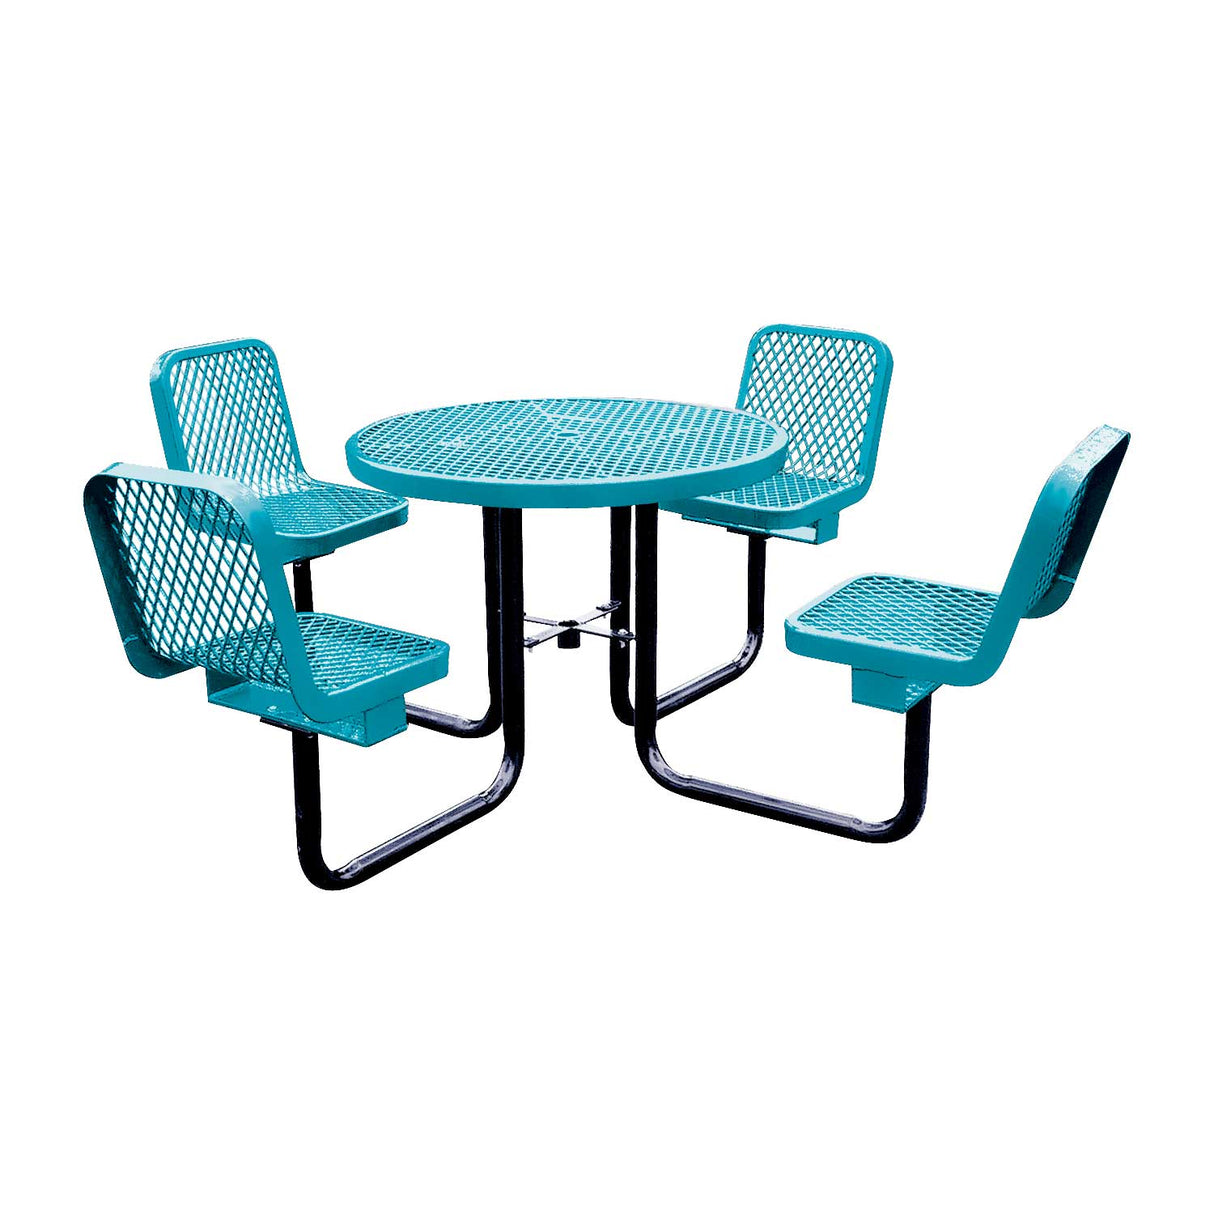 36˝ Round Table with Chairs